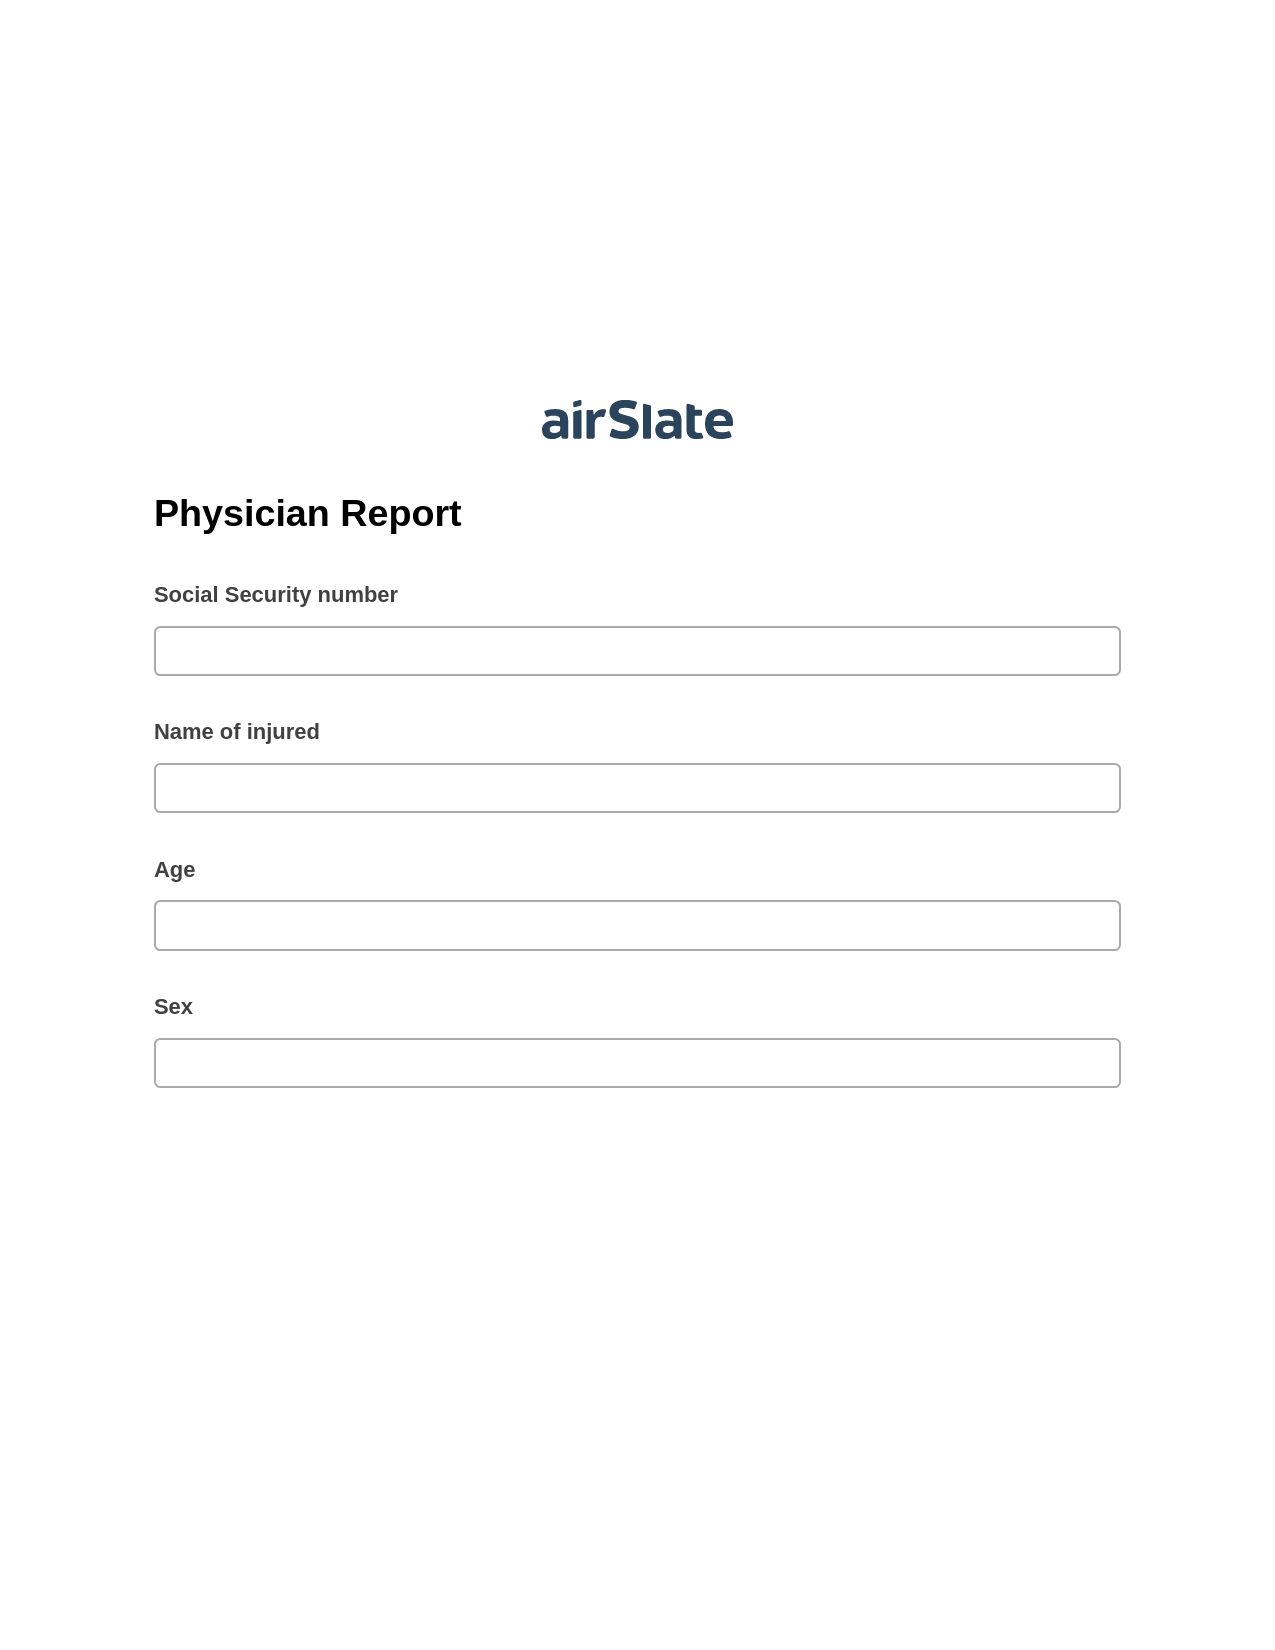 Physician Report Pre-fill from Excel Spreadsheet Bot, Export to MS Dynamics 365 Bot, Export to WebMerge Bot